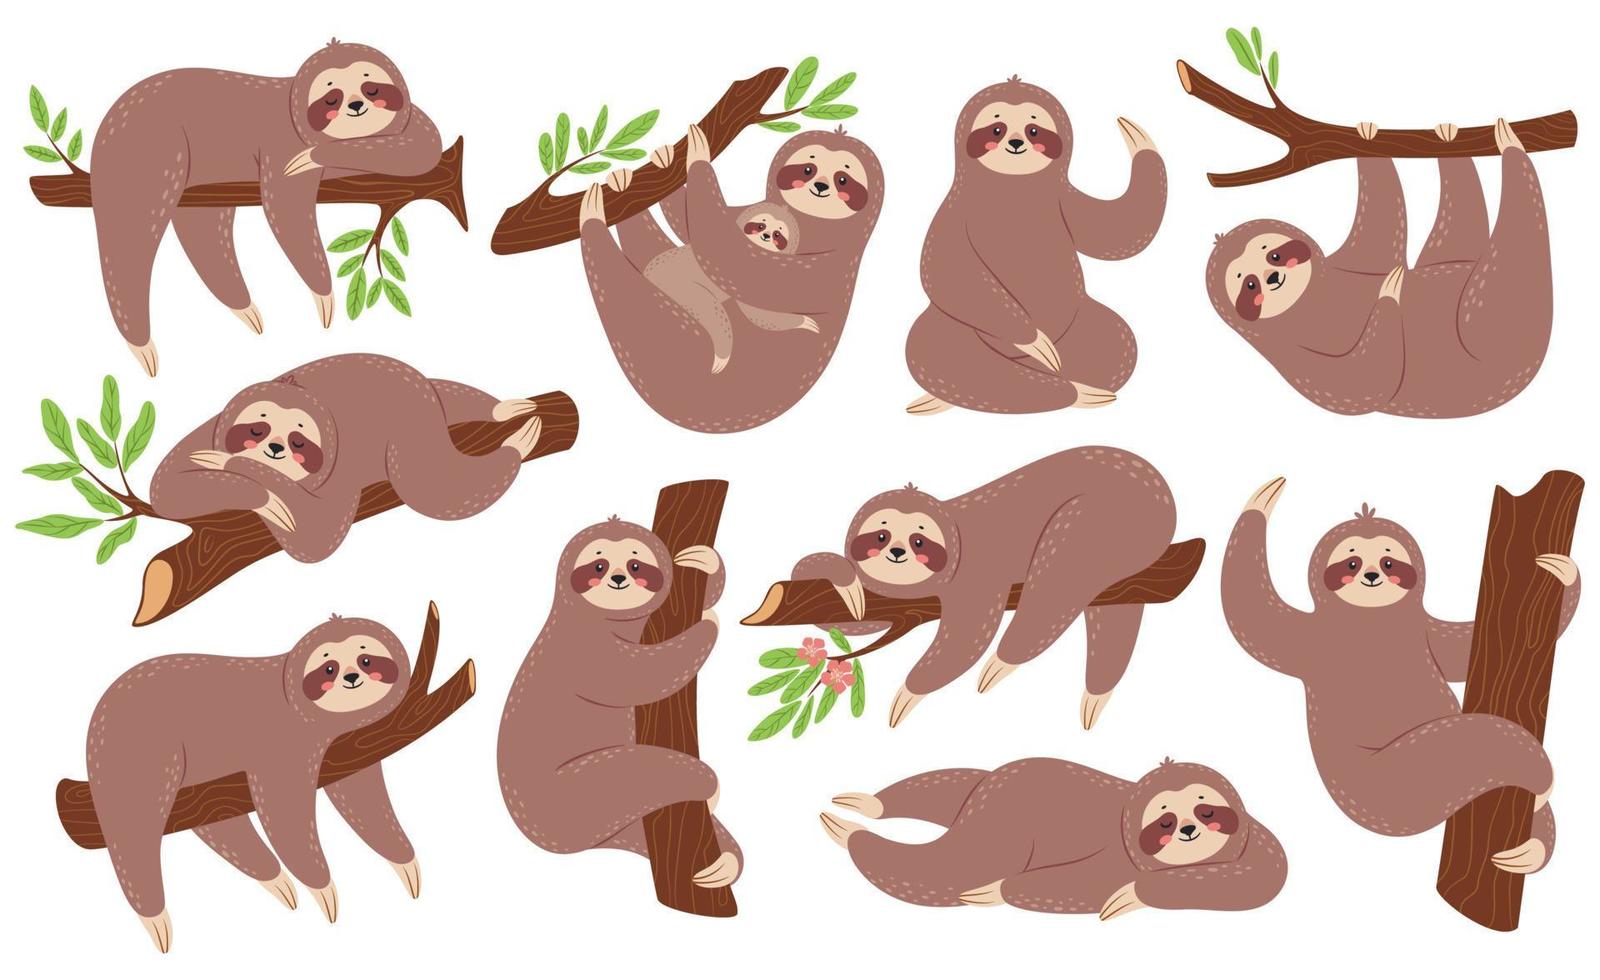 Sloth. Funny sloths hanging on branch, climbing tree, sleeping. Cute baby animal with mother. Lazy sleepy animals in various poses vector set